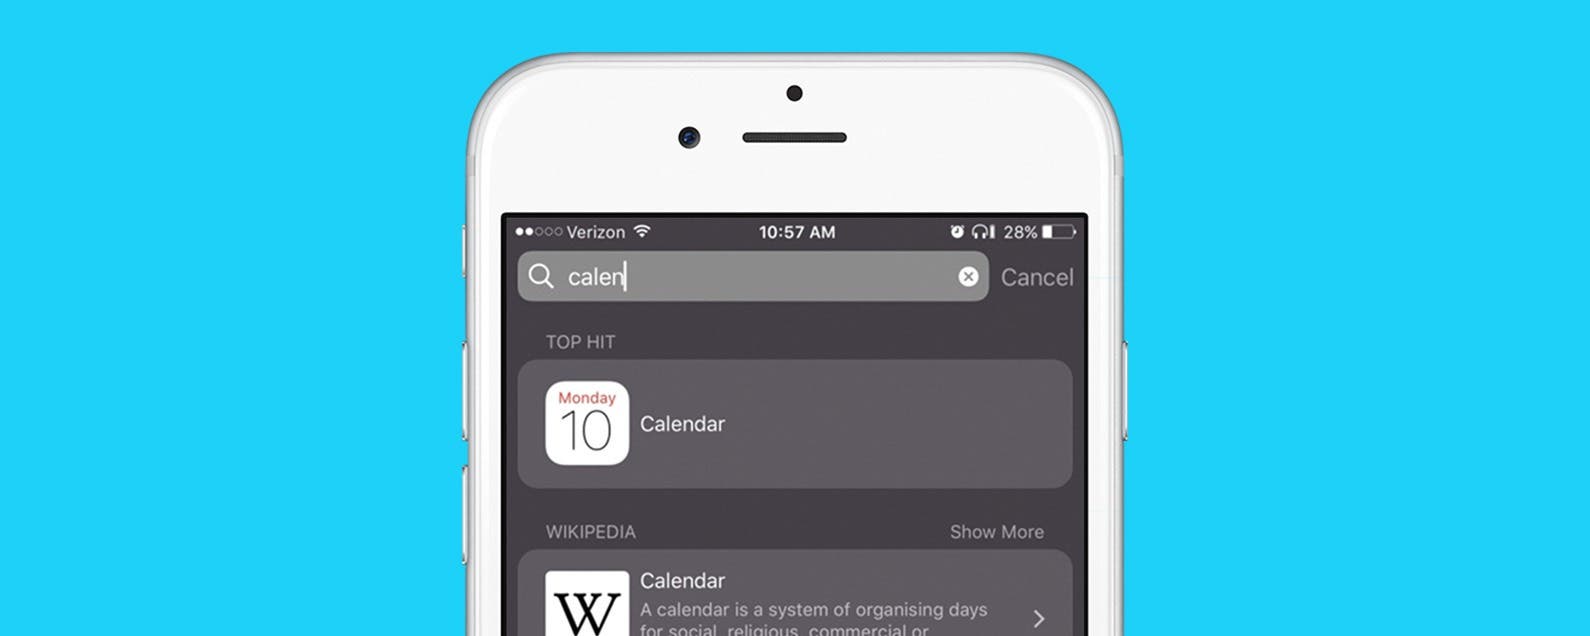 iPhone Calendar Disappeared? How to Get the Calendar App ...